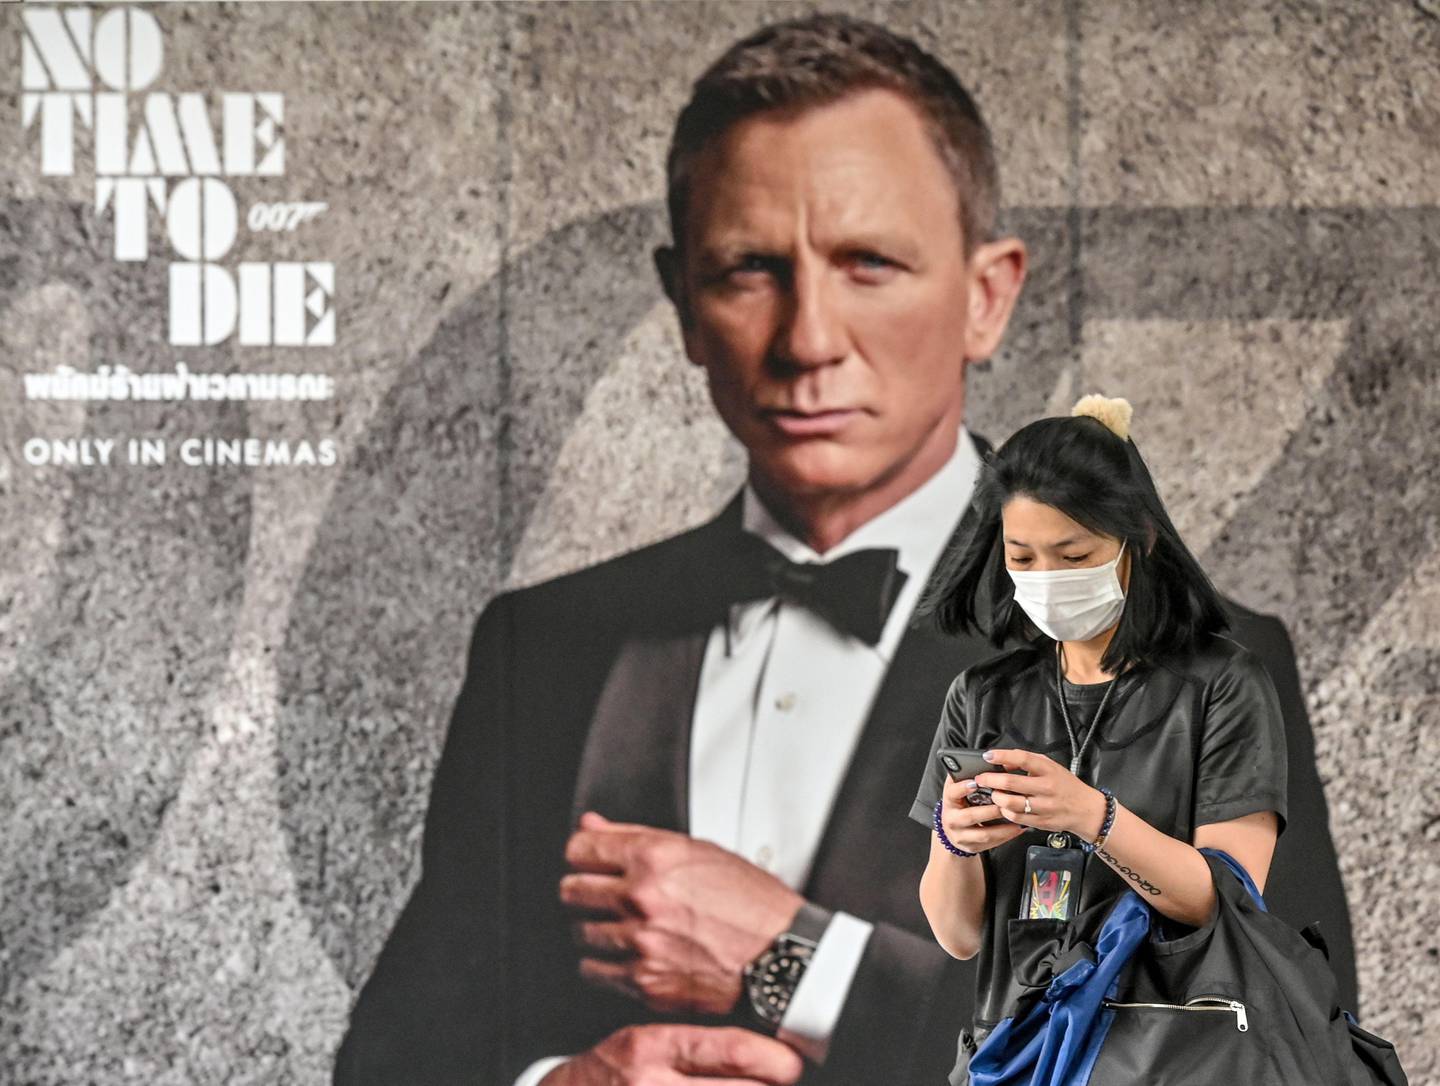 (FILES) In this file photo taken on February 28, 2020, a woman wearing a facemask amid fears of the spread of the COVID-19 novel coronavirus walks past a poster for the new James Bond movie "No Time to Die" in Bangkok. - New James Bond film "No time to die" release is delayed to November after virus fears according to the studio. (Photo by Mladen ANTONOV / AFP)